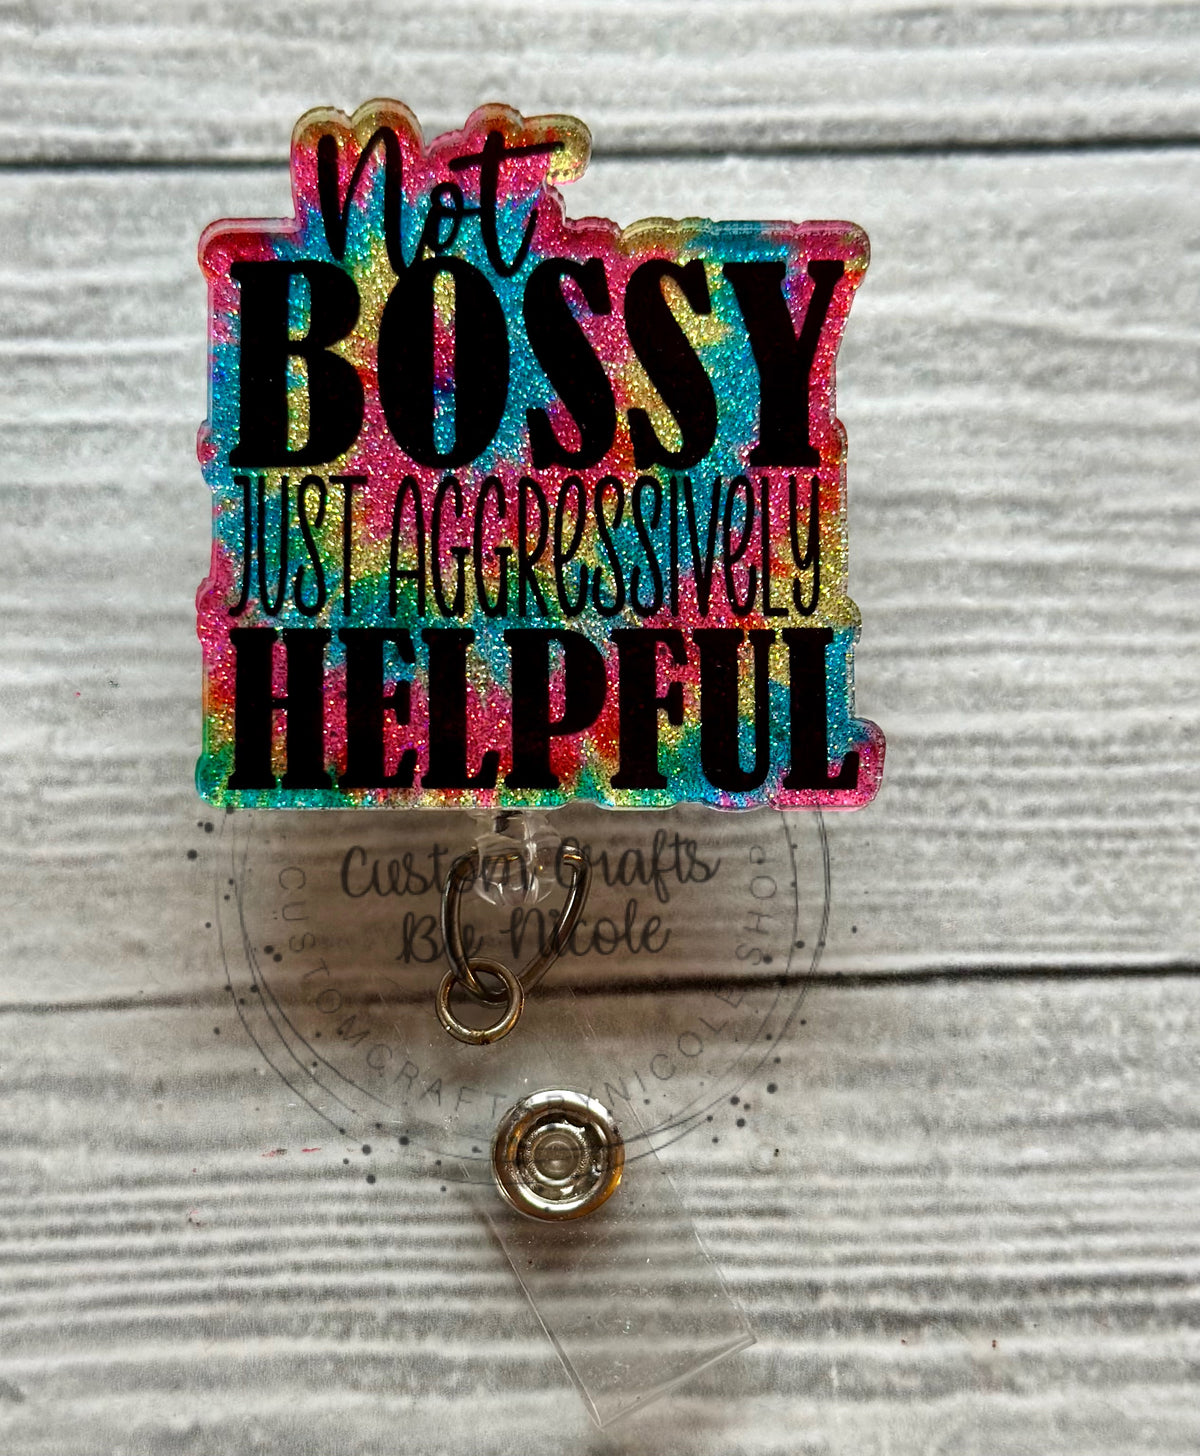 Not bossy, just aggressively helpful